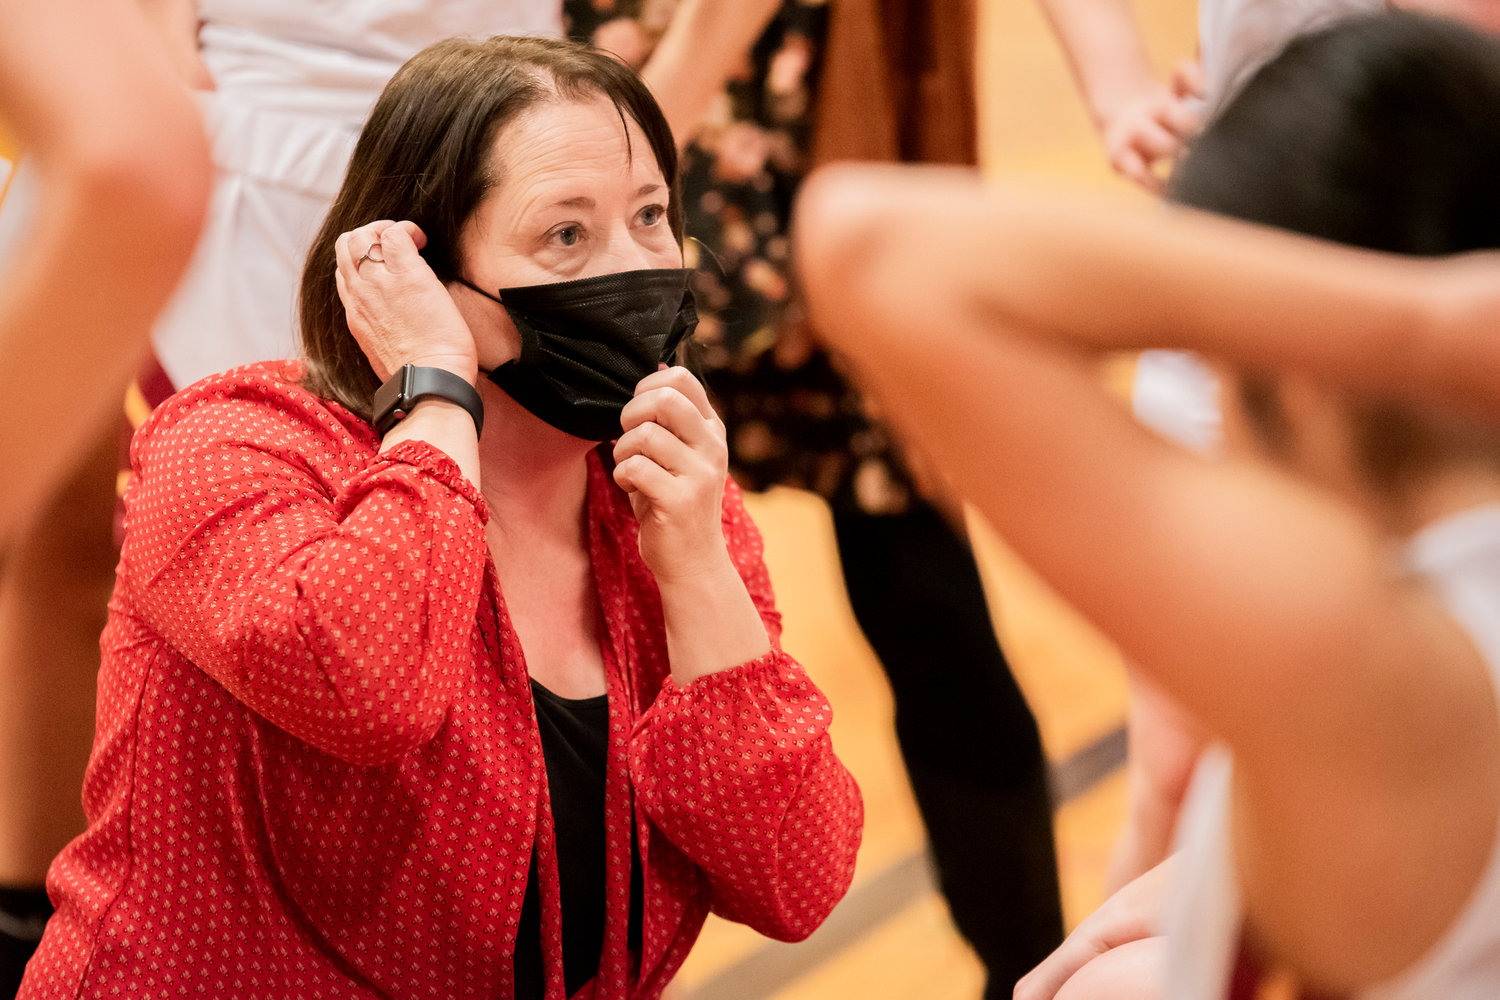 Winlock Head Coach Dracy McCoy adjusts her mask while talking to athletes courtside during a game against Stevenson.